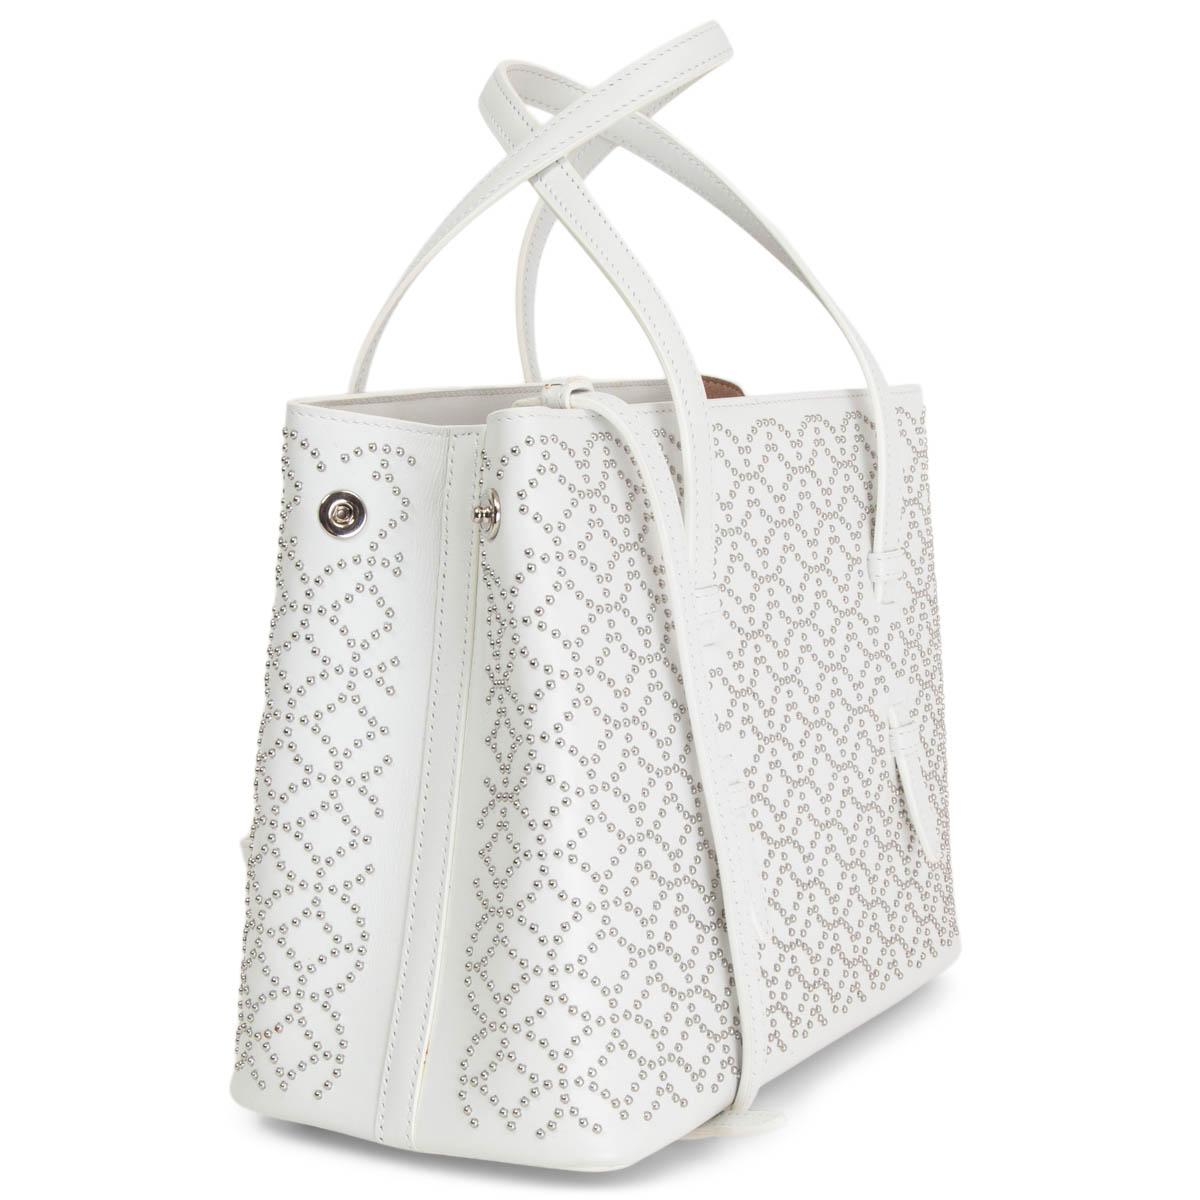 ALAIA white leather STUDDED VIENNE MINI Tote Shoulder Bag